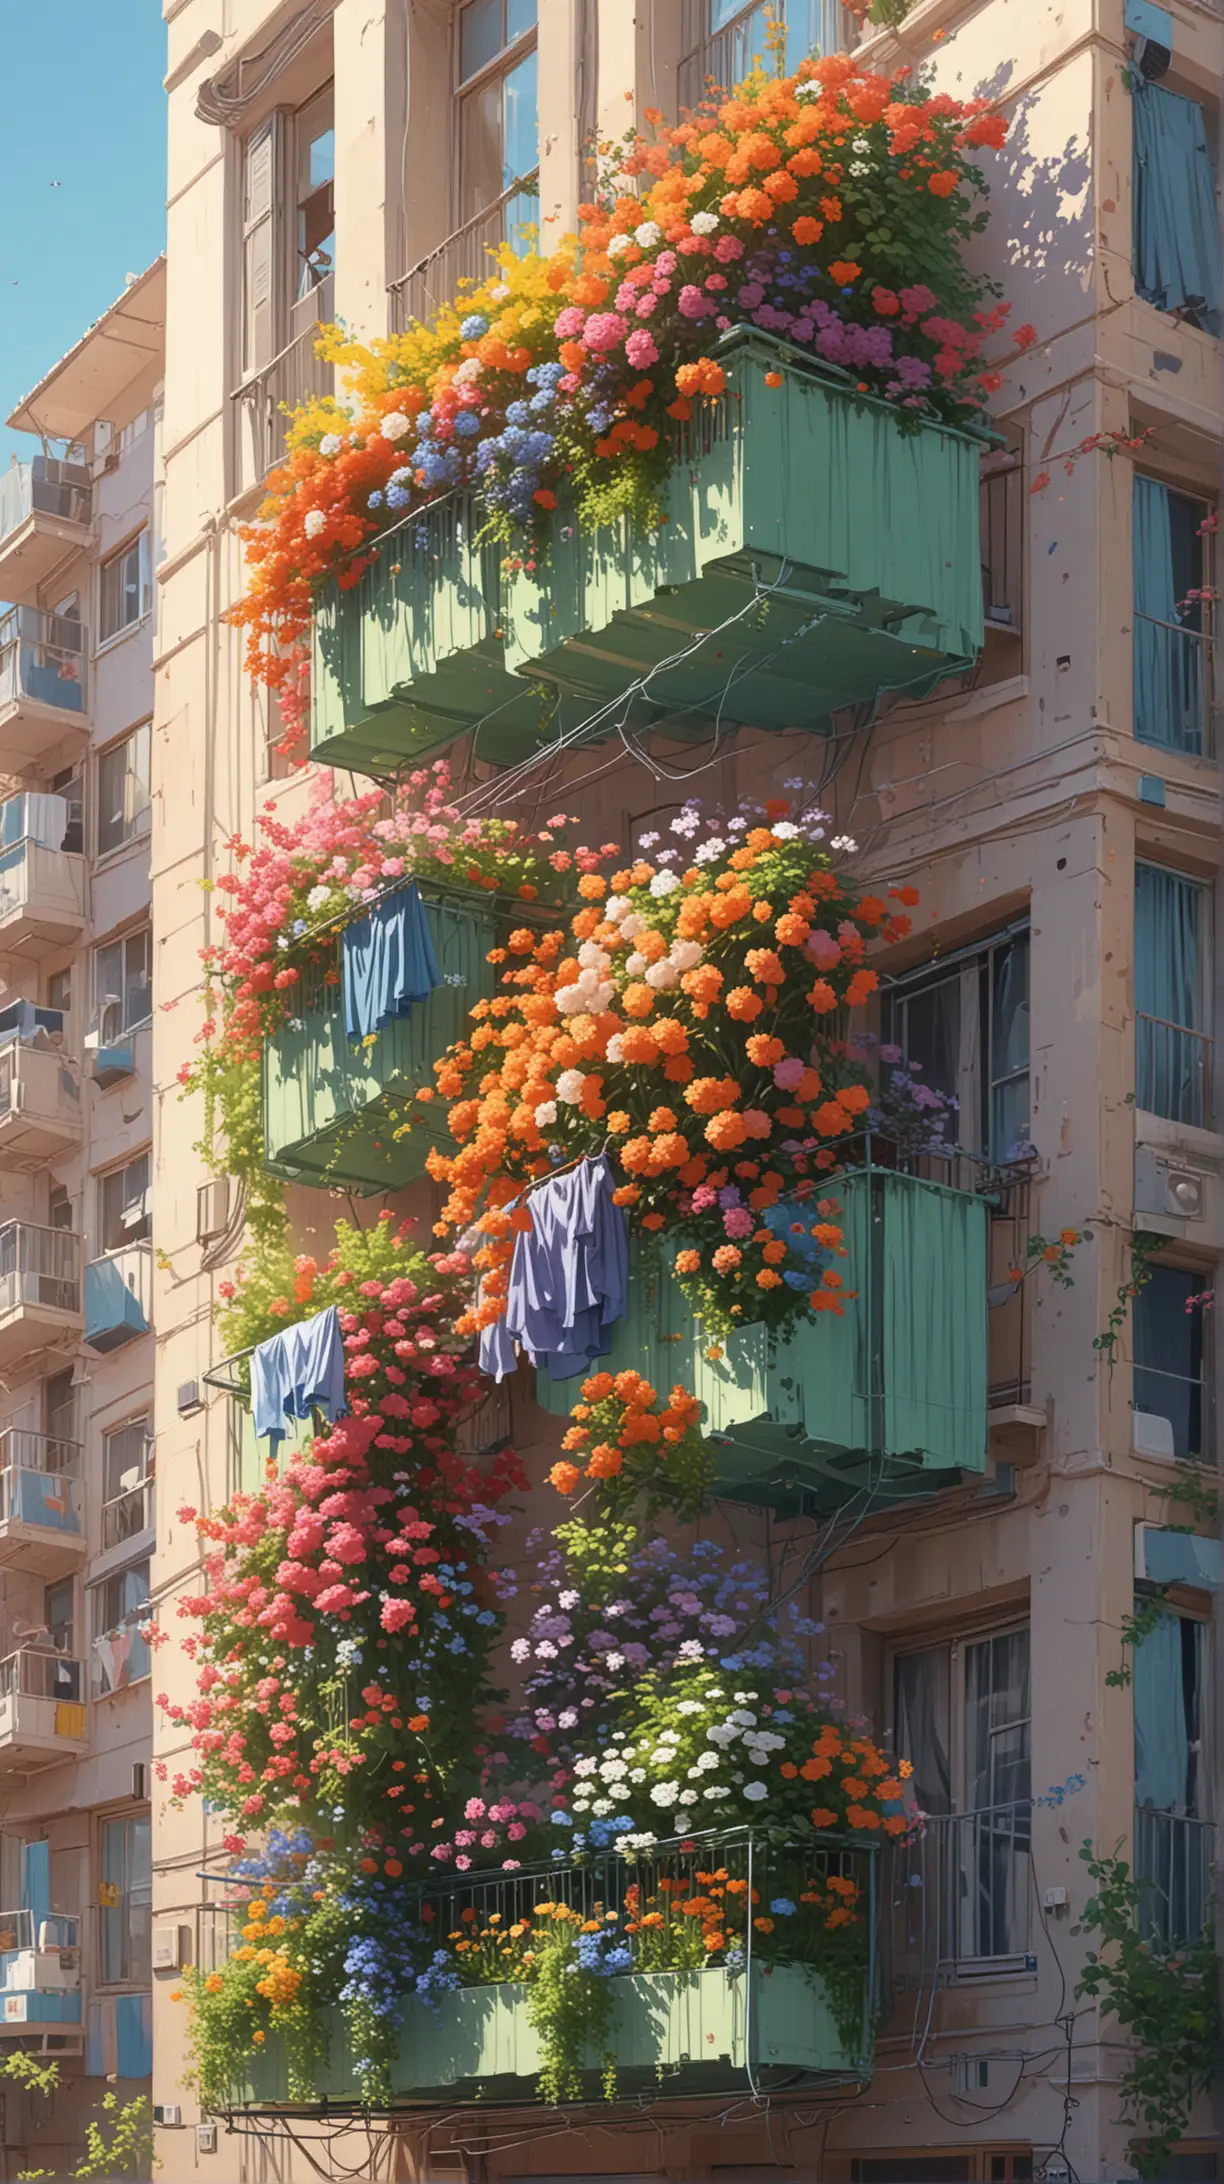 a cascade of vibrant flowers and swaying laundry on the apartment building balconies in sleezy neghbourhood, Air condition boxes on every balconies, beautiful summer, anime, ghibli studio style, trending pixiv fansbox, acryluc palette colors, ultra highly detailed form and line, wire and pole, codex_401 art style